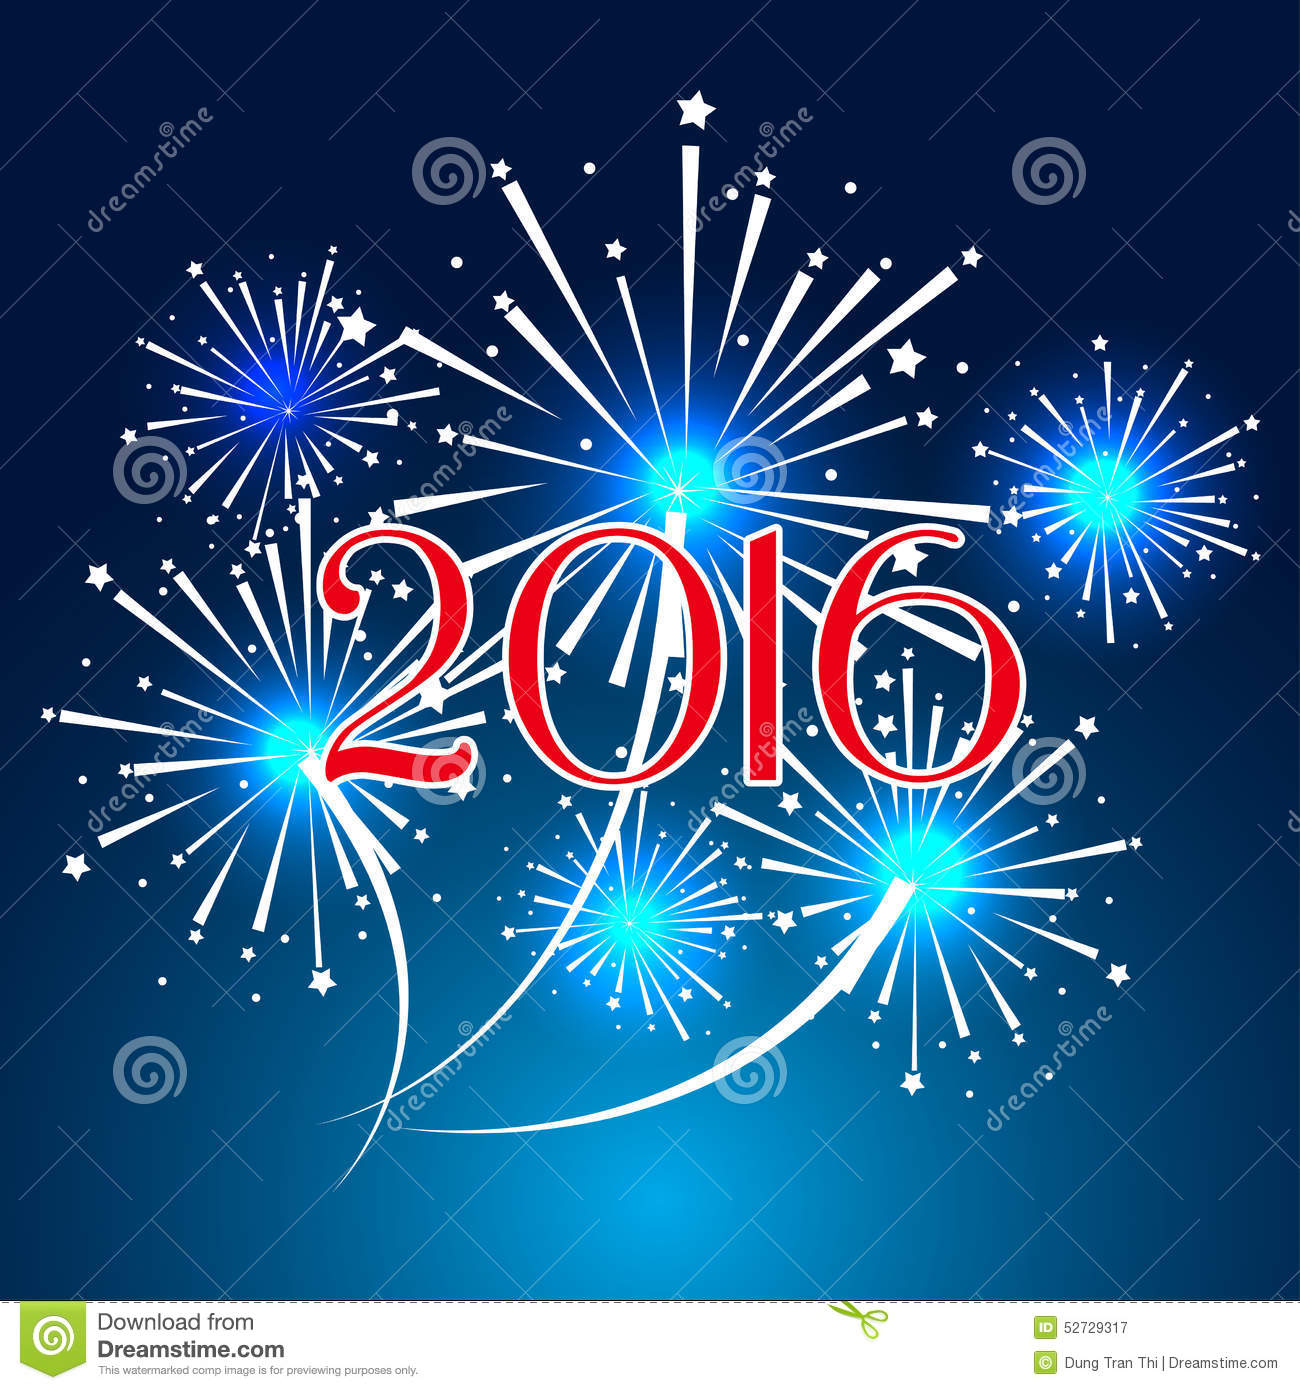 Happy New Year 2016 Images Free Wallpaper 17360 Wallpaper computer